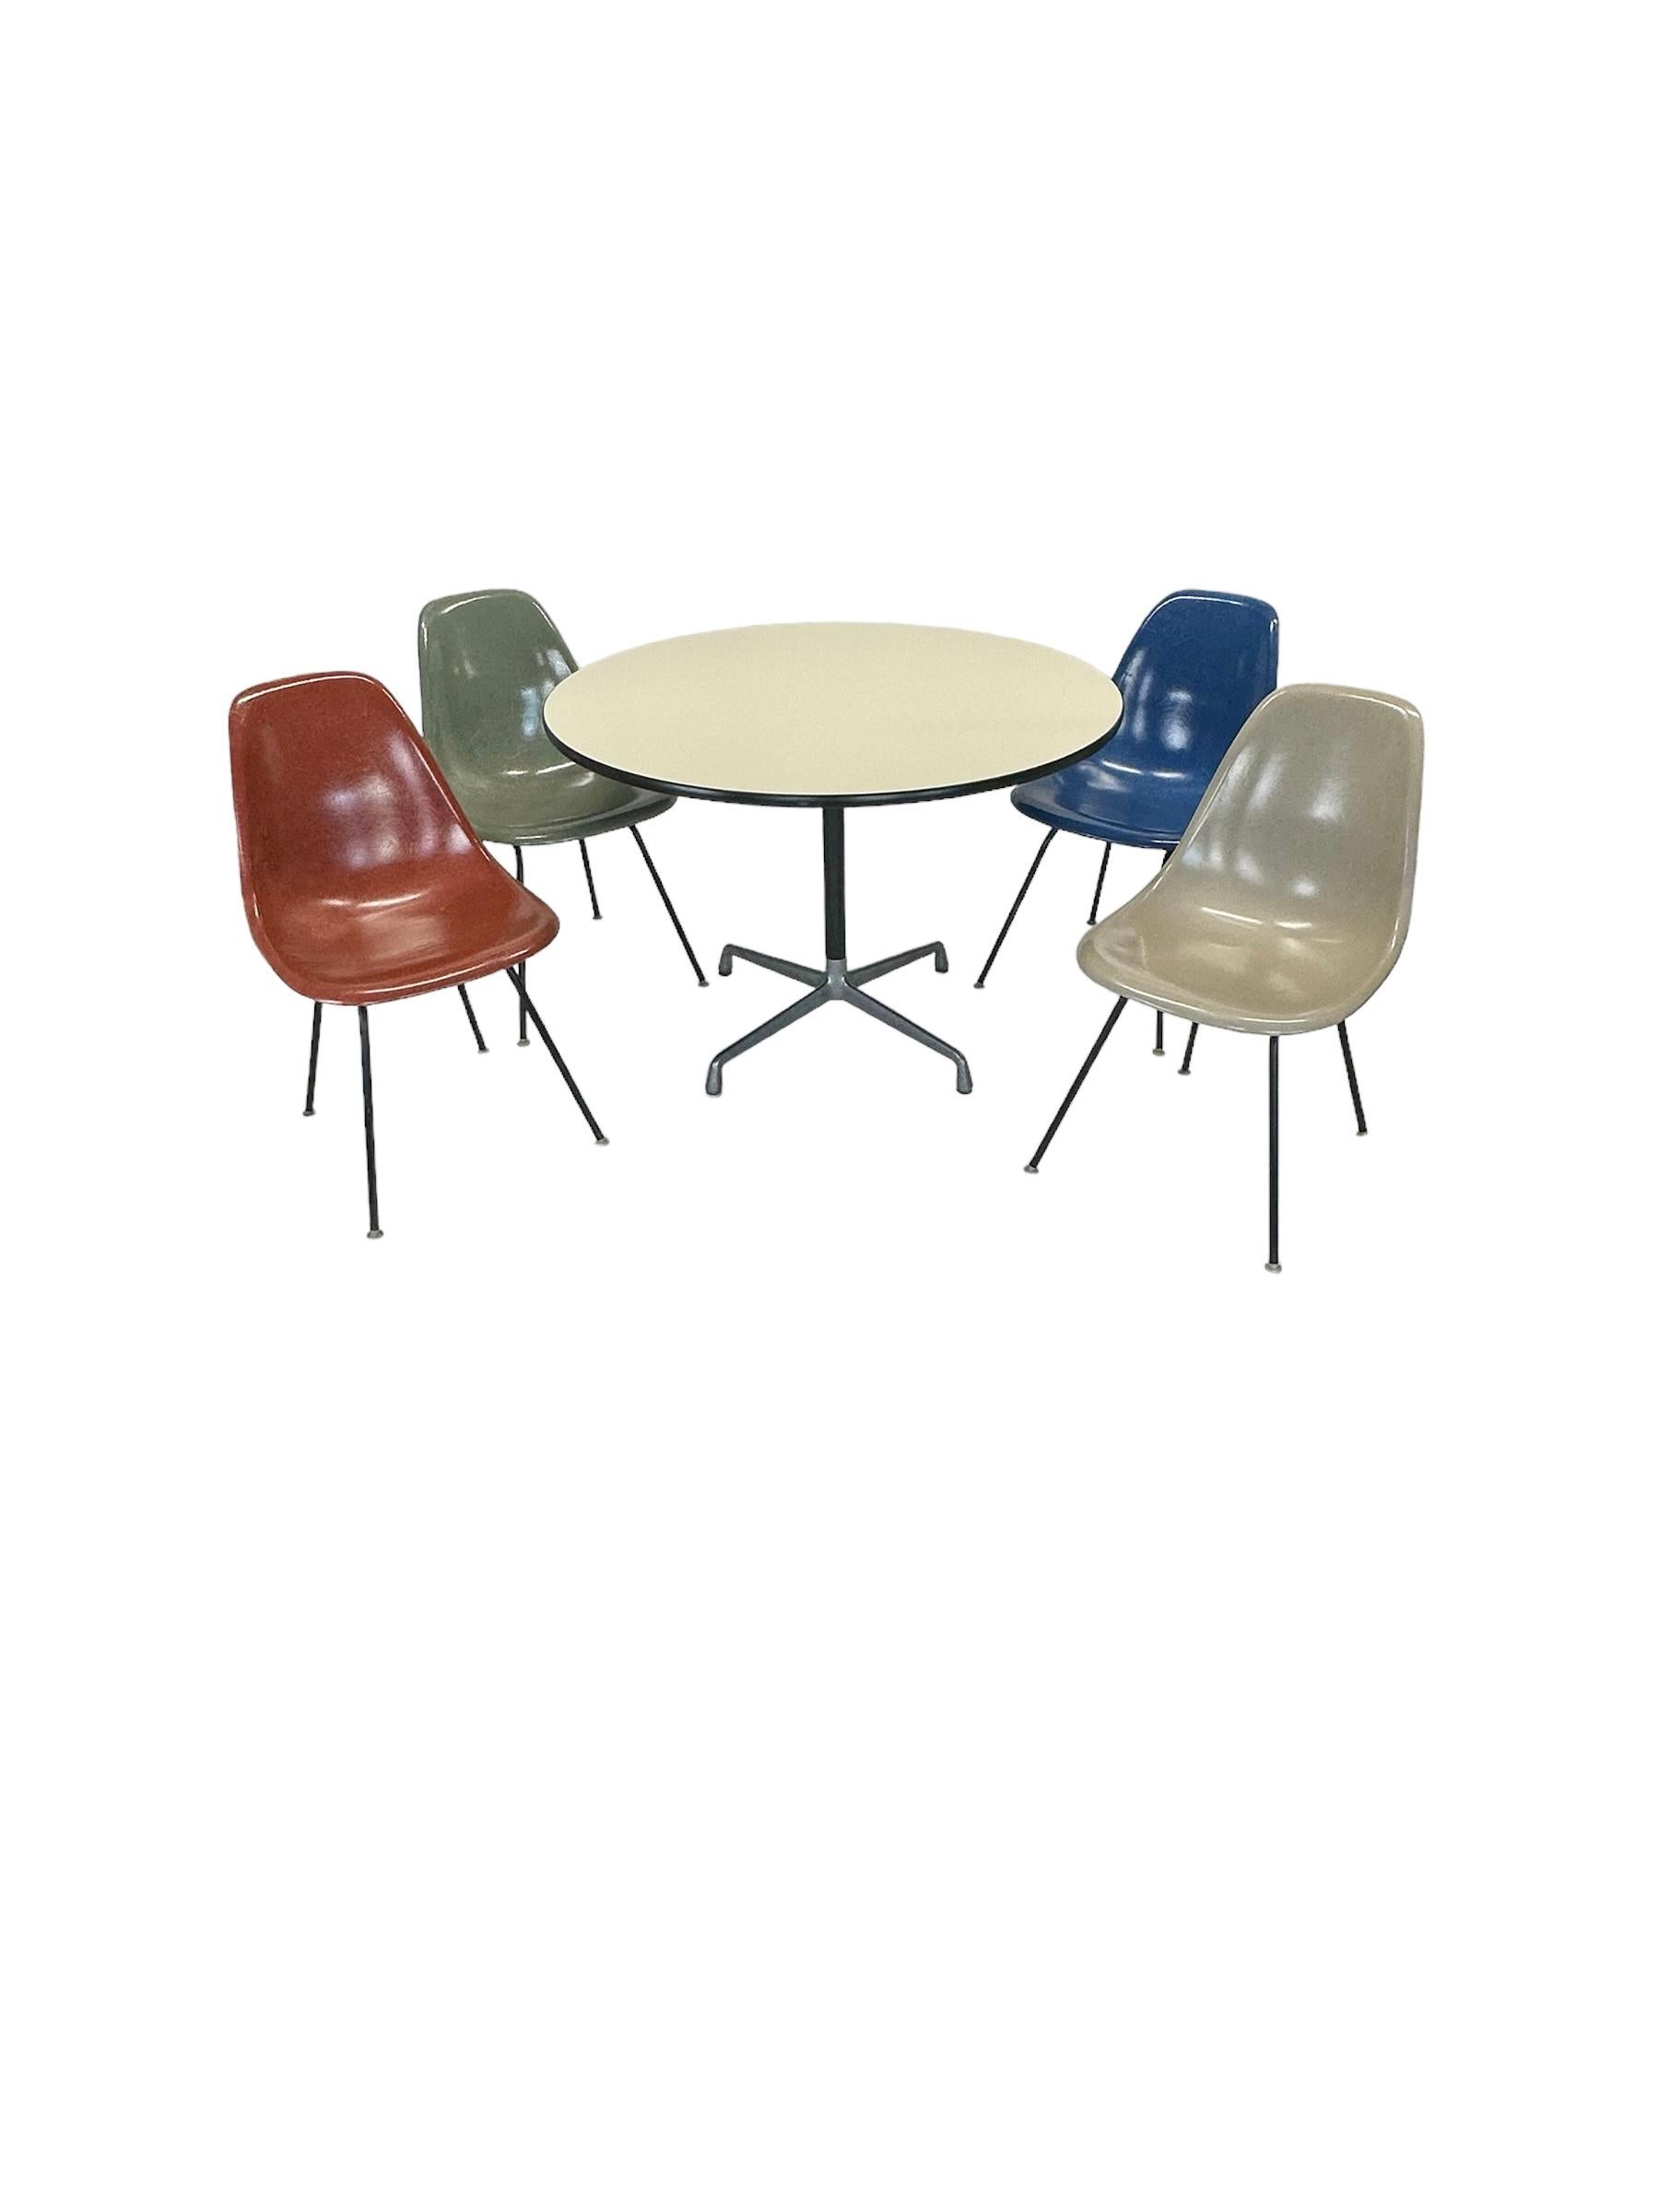 Original signed Herman Miller Eames dining set. Features multicolored shell chairs on black H bases. All nylon self leveling chair glides intact, for use on multiple types of surfaces. All chairs and table are signed Herman Miller. Fiberglass shells